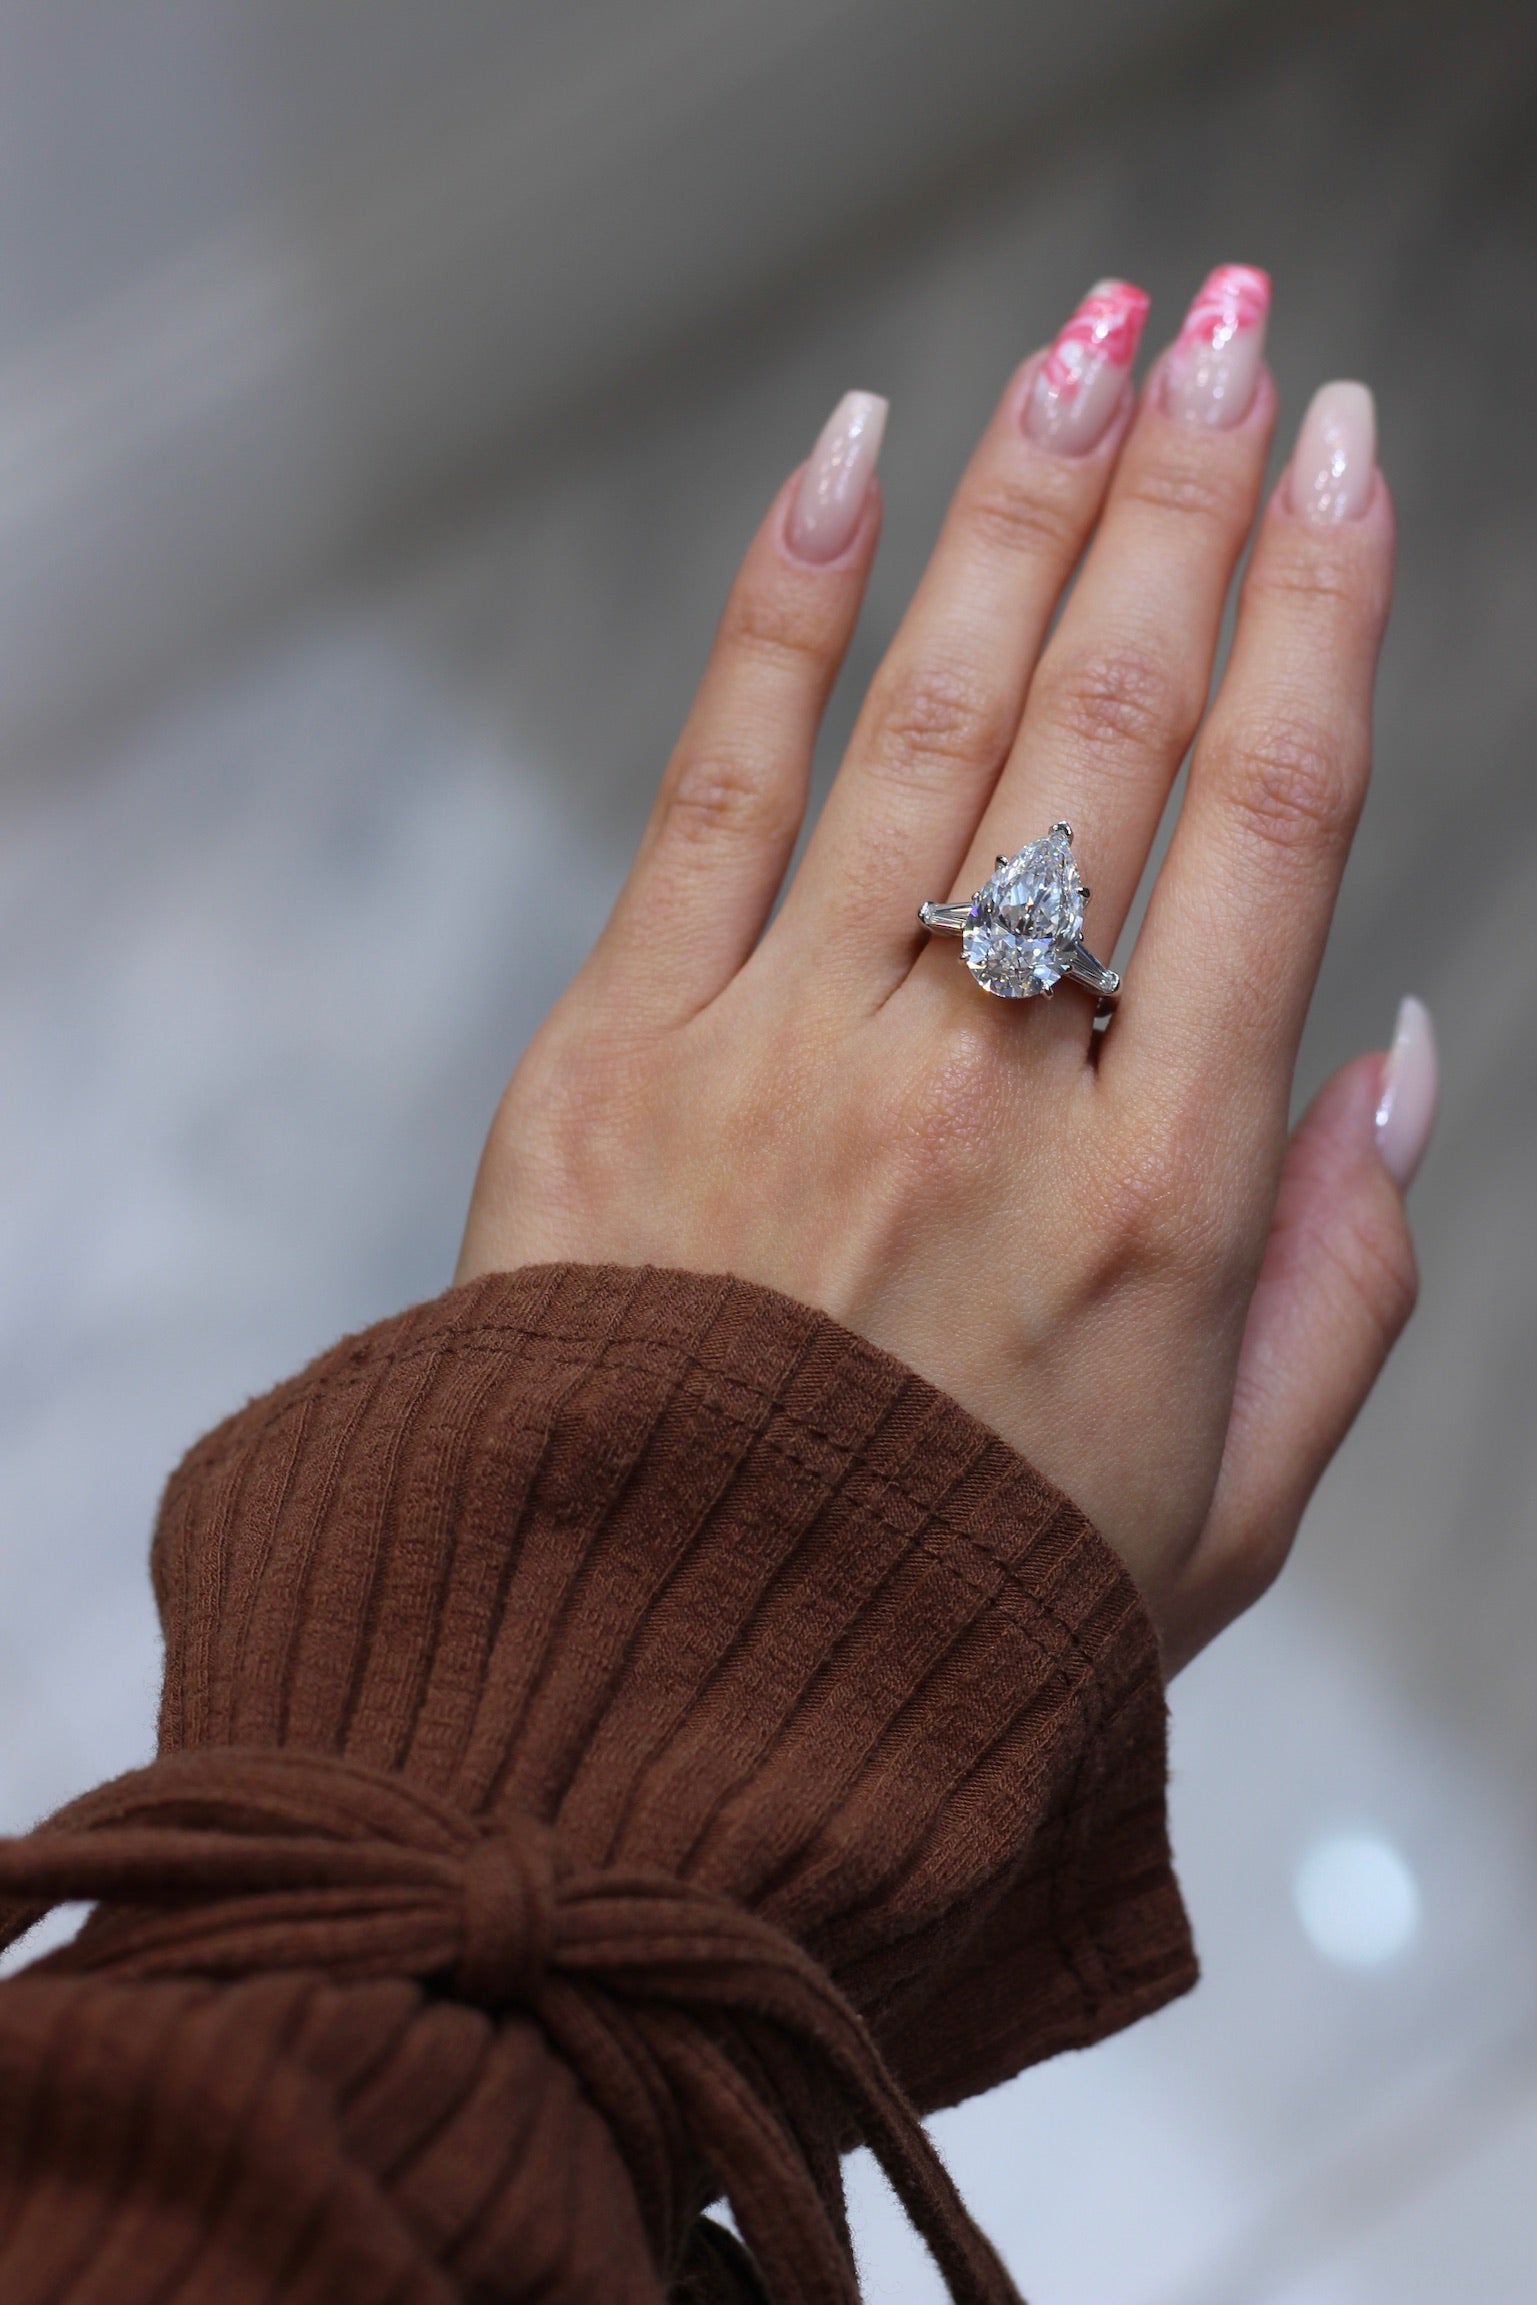 7 carat pear shape cut diamond engagement ring solitaire with tappered baguettes set in platinum